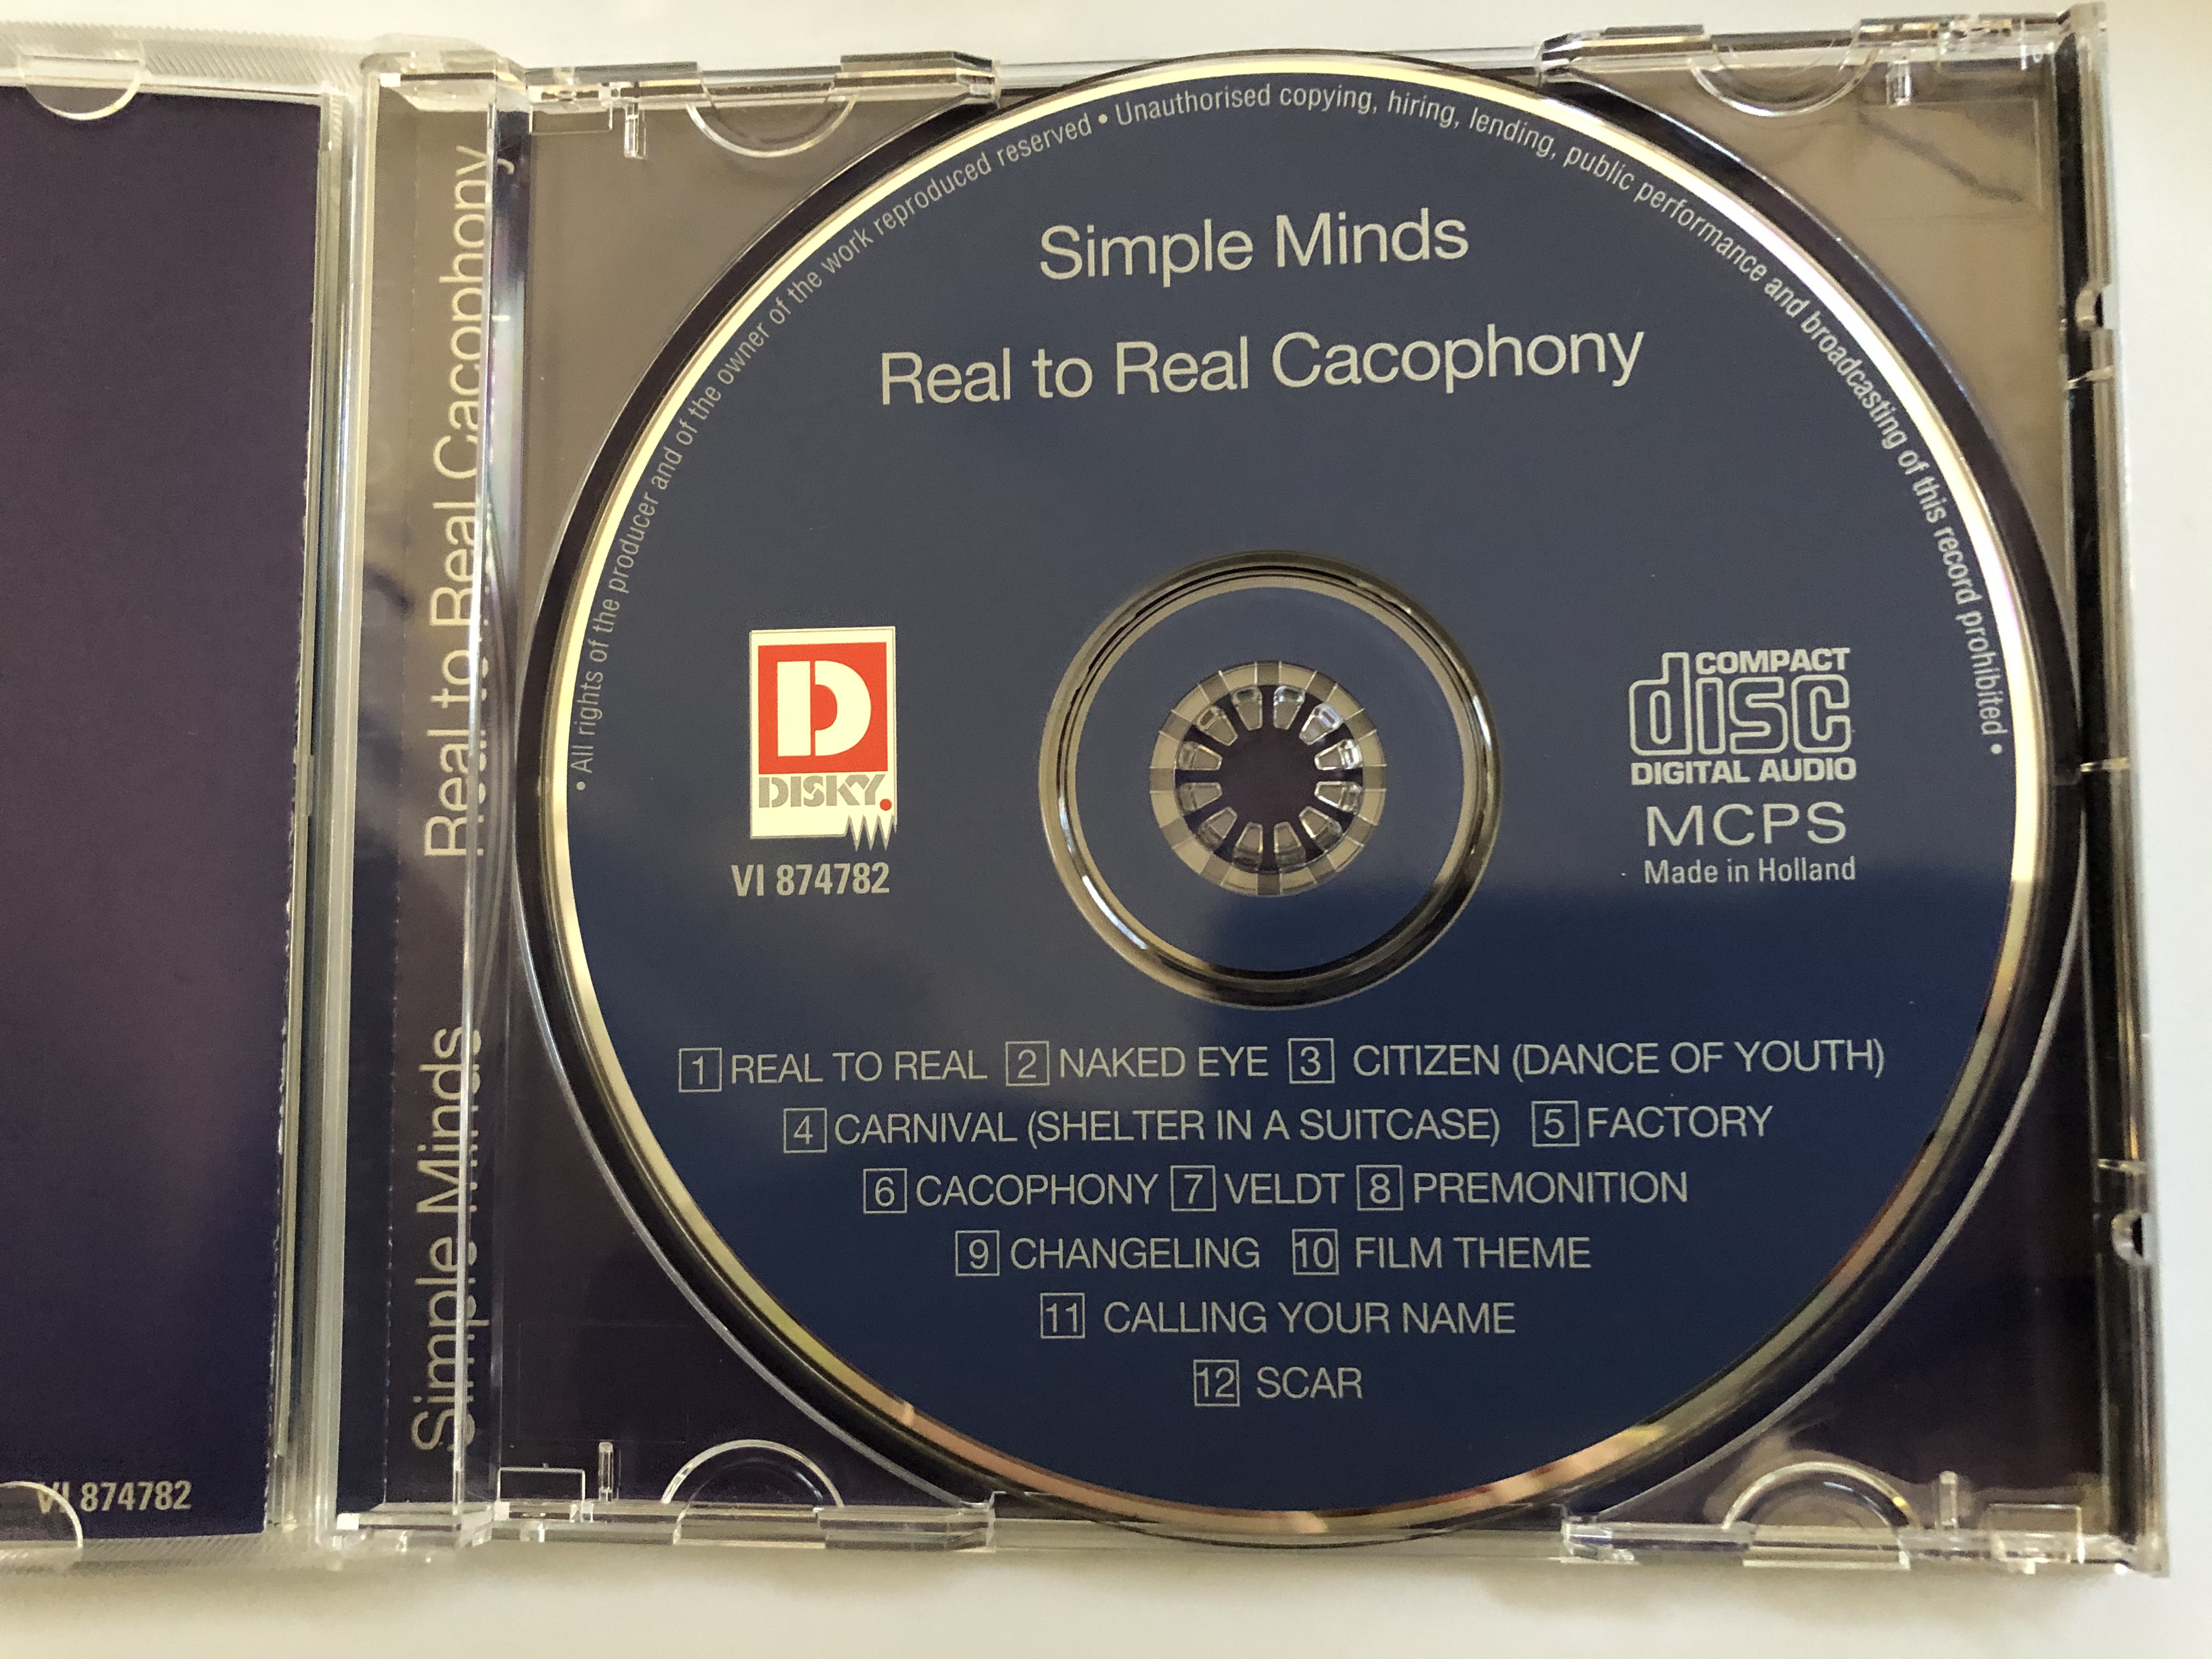 simple-minds-real-to-real-cacophony-disky-audio-cd-1996-vi-874782-3-.jpg